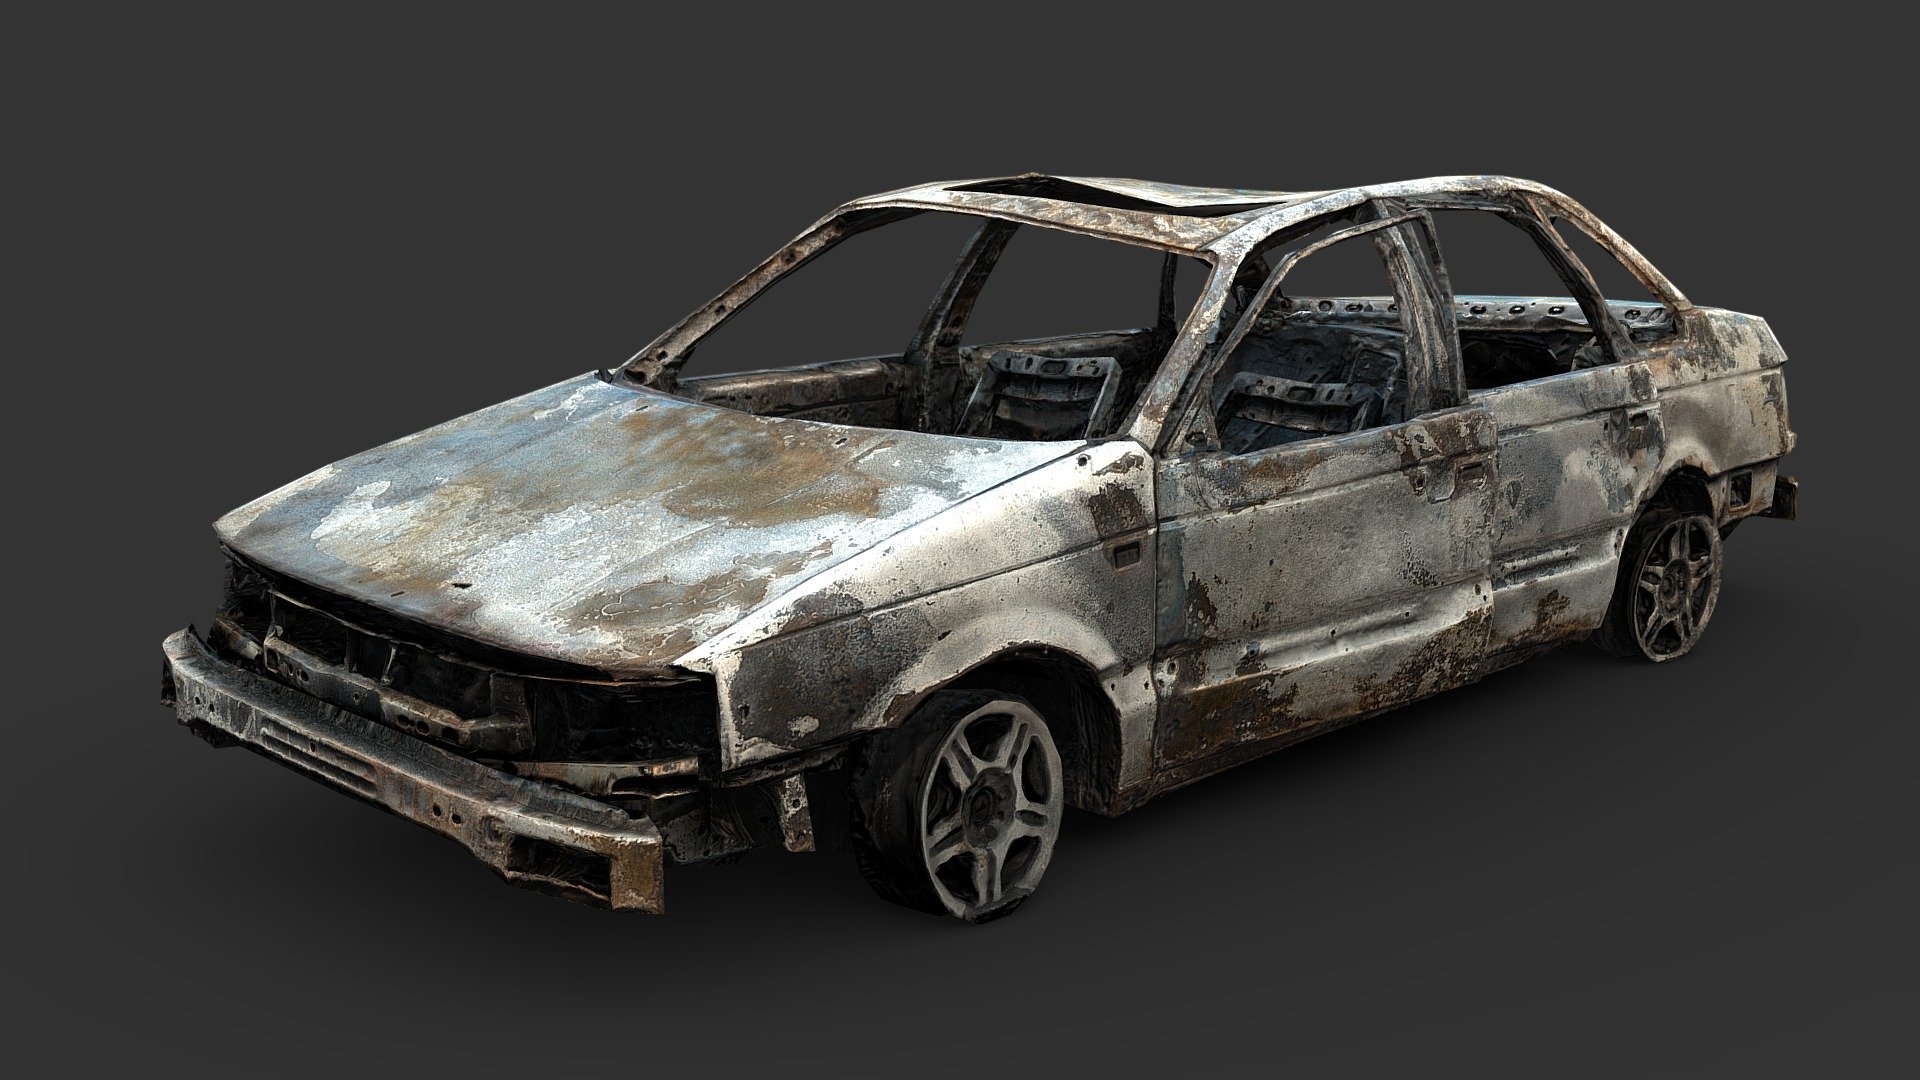 Gameready model made from 3D scanned data of a burned-out car, I actually can't tell what kind of car this once was, all of its defining features have been burned away

Made in Realitycapture, Zbrush, 3DSMax, and Substance Painter
Includes 4k PBR textures - Burned-Out Car - Buy Royalty Free 3D model by Renafox (@kryik1023) 3d model